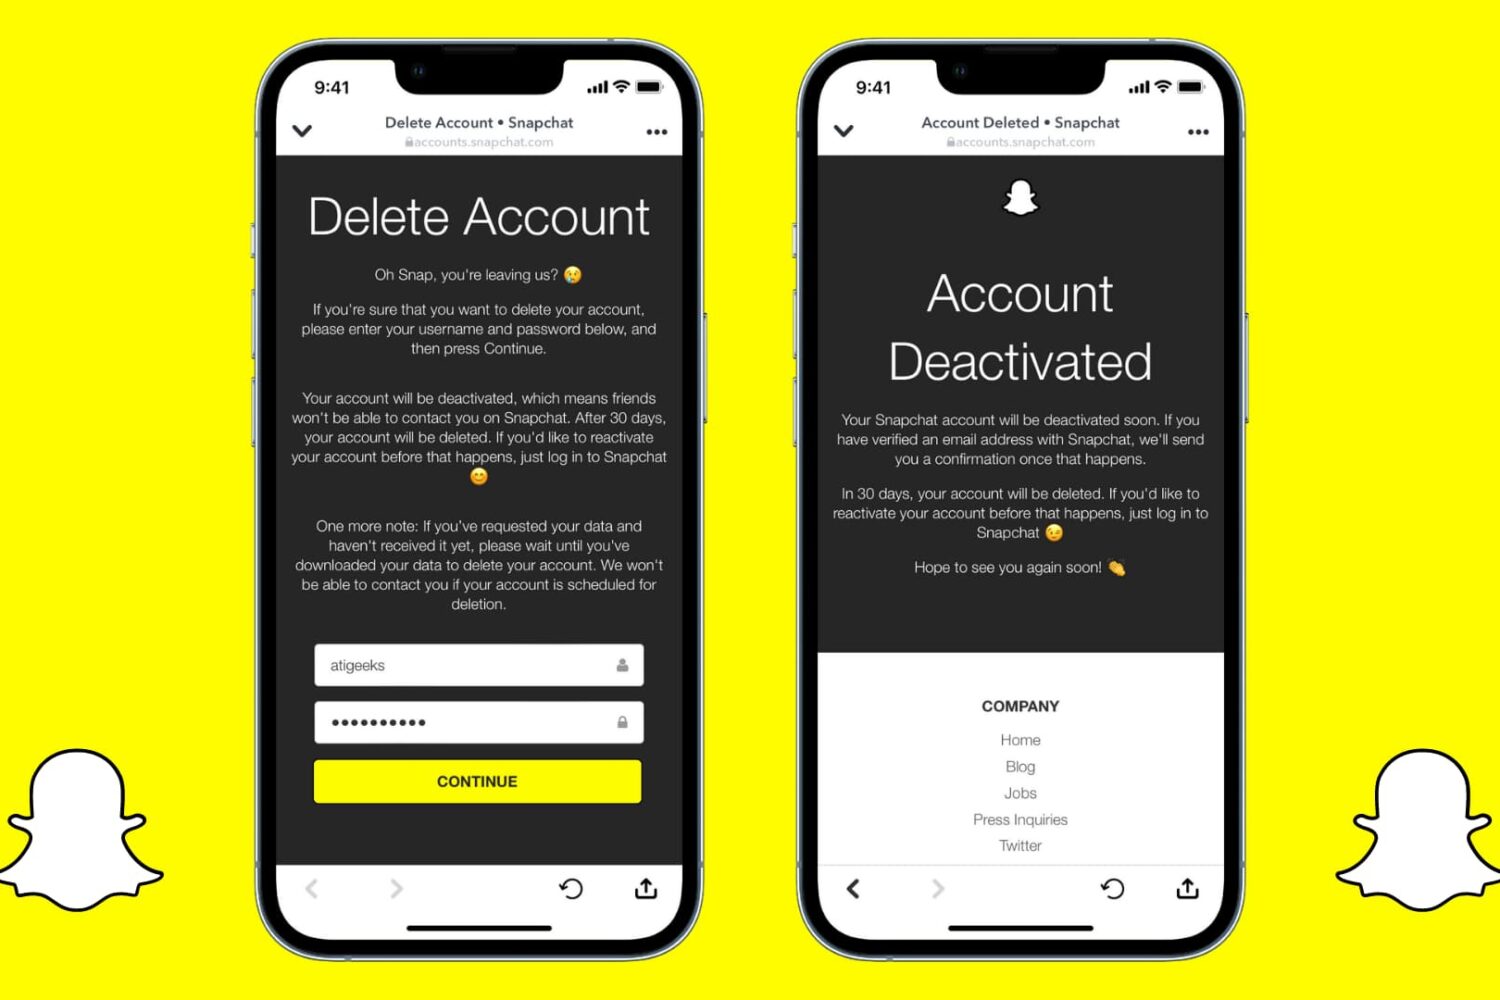 Steps to Delete or Deactivate your Snapchat account